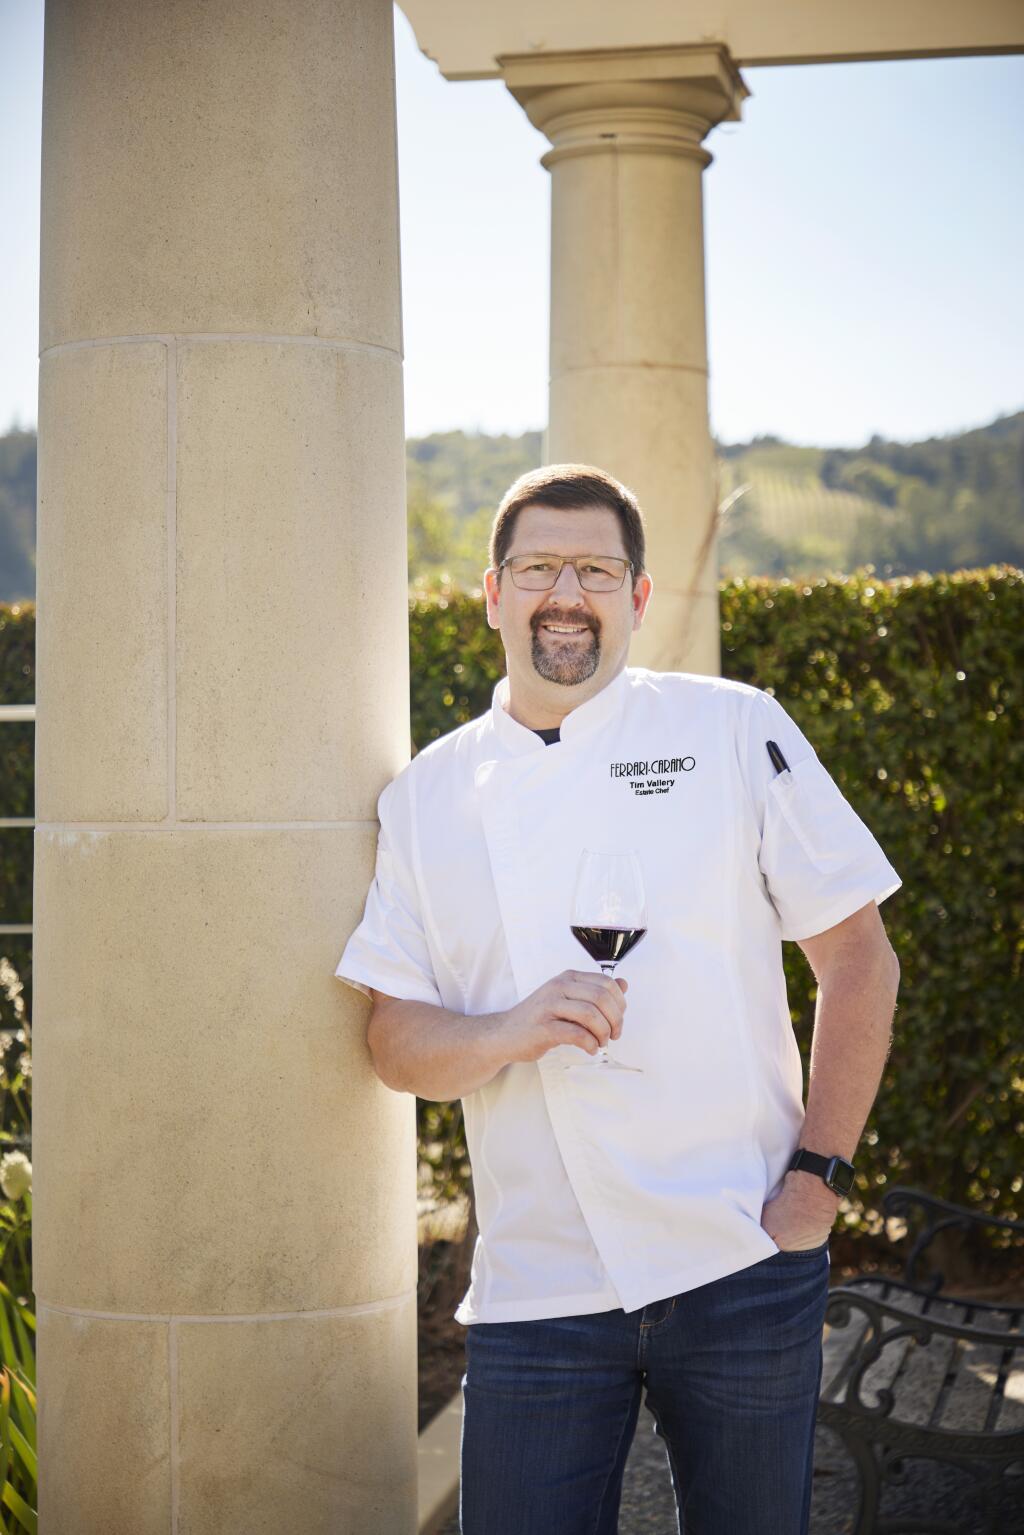 Tim Vallery has been named estate chef at Ferrari-Carano Vineyards and Winery in Santa Rosa. (Sara Sanger photo, March 9, 2022)